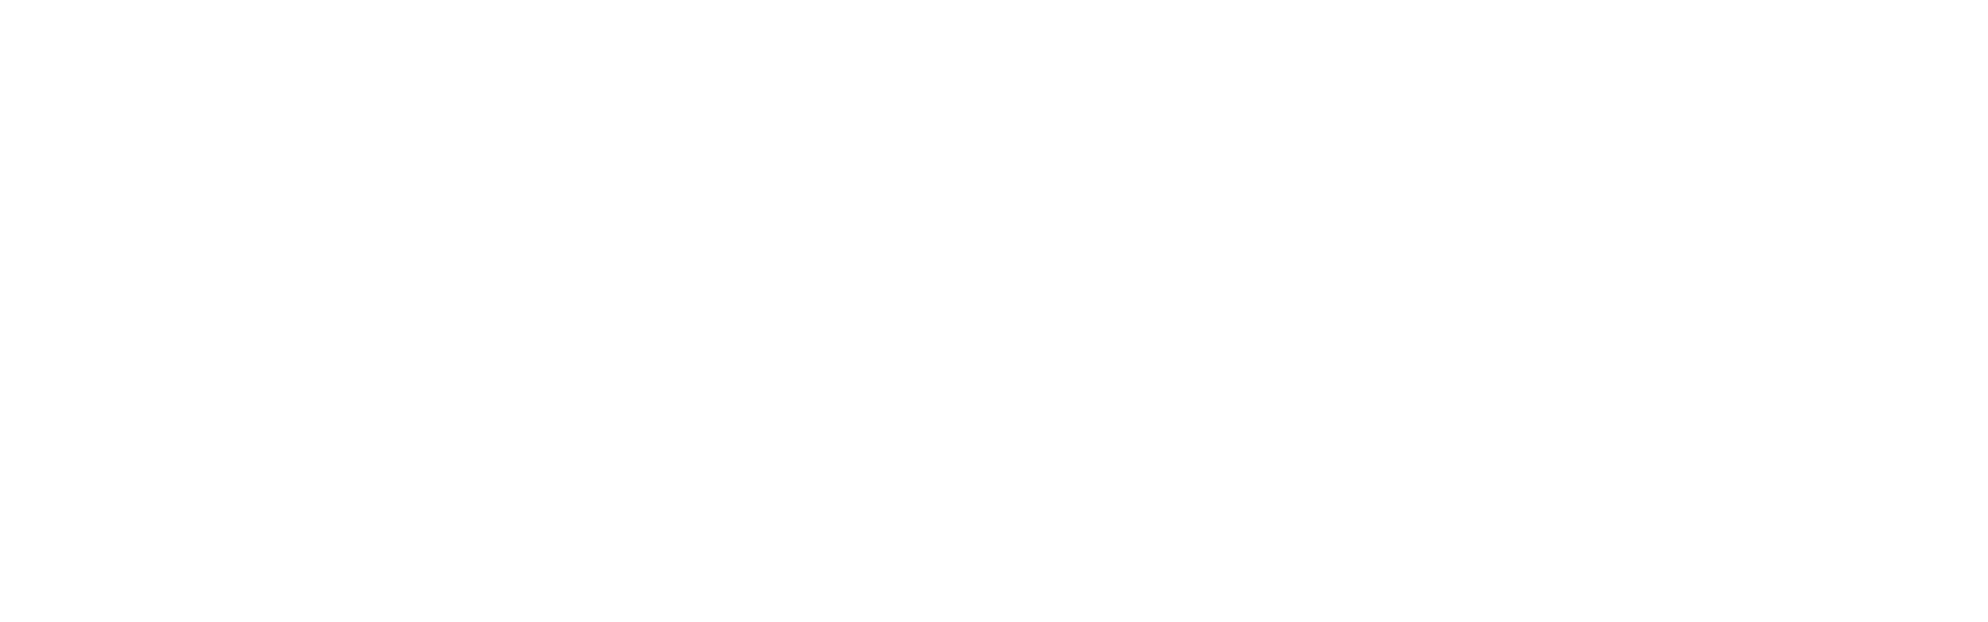 OpenFF Recharge documentation logo